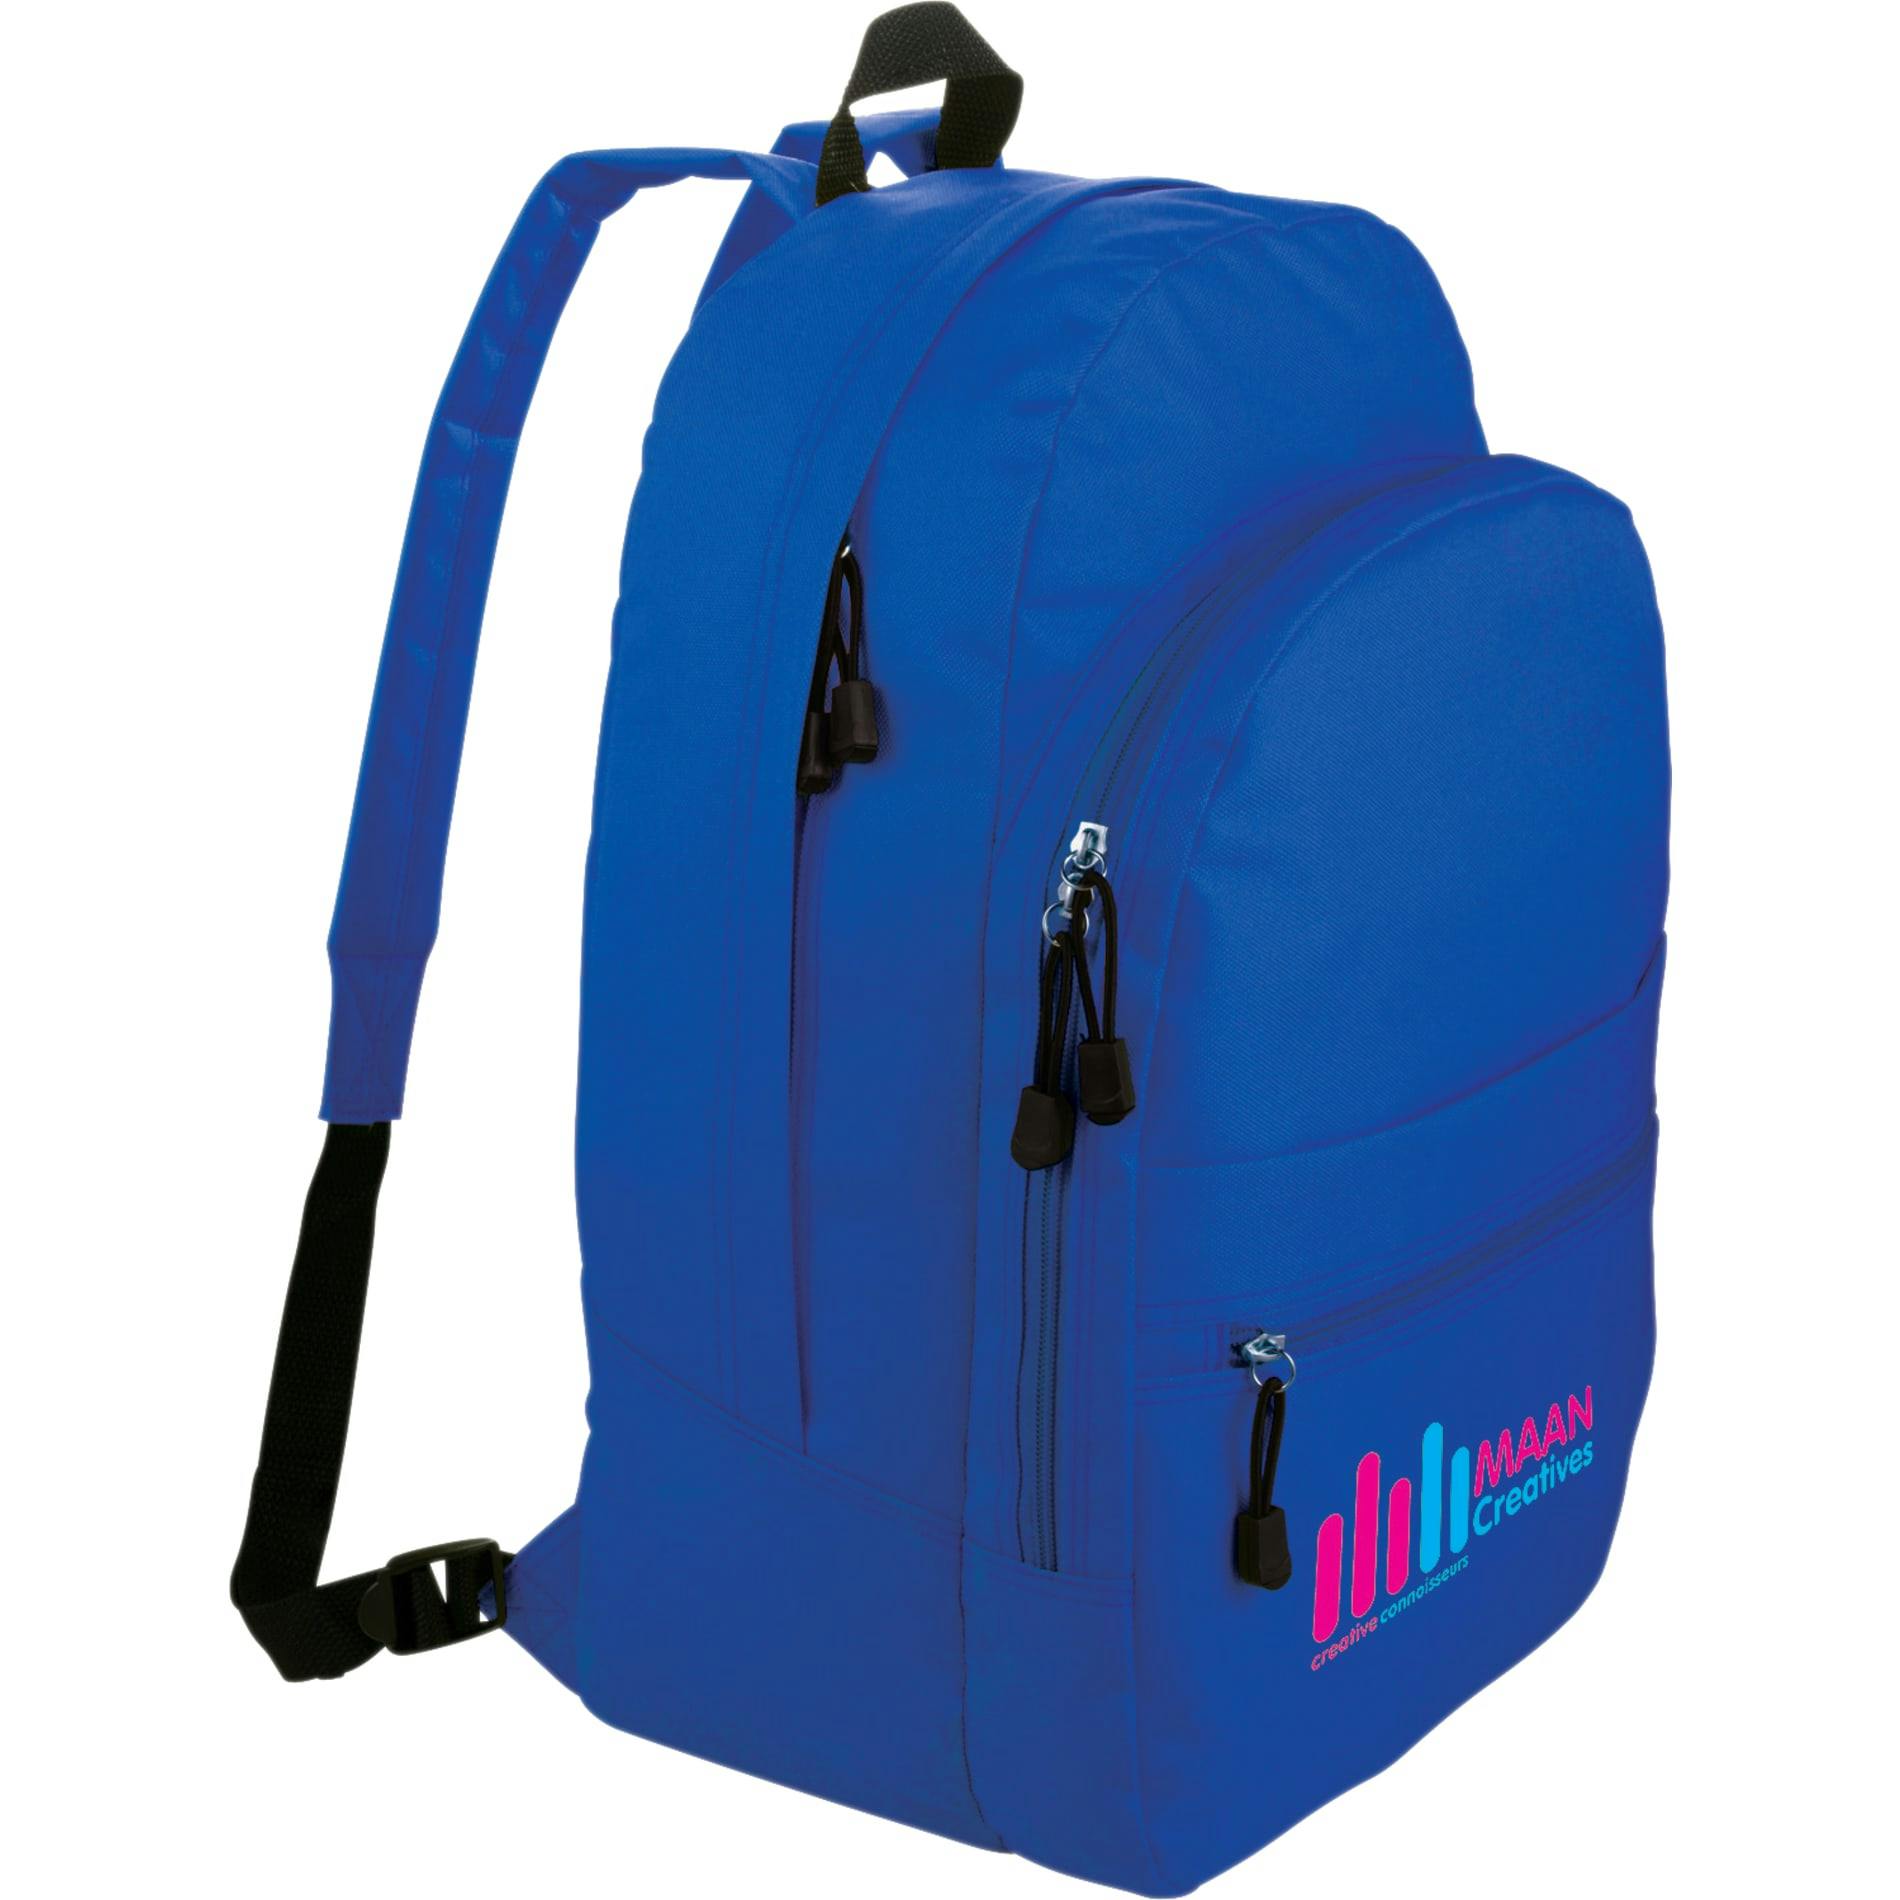 Classic Deluxe Backpack - additional Image 3